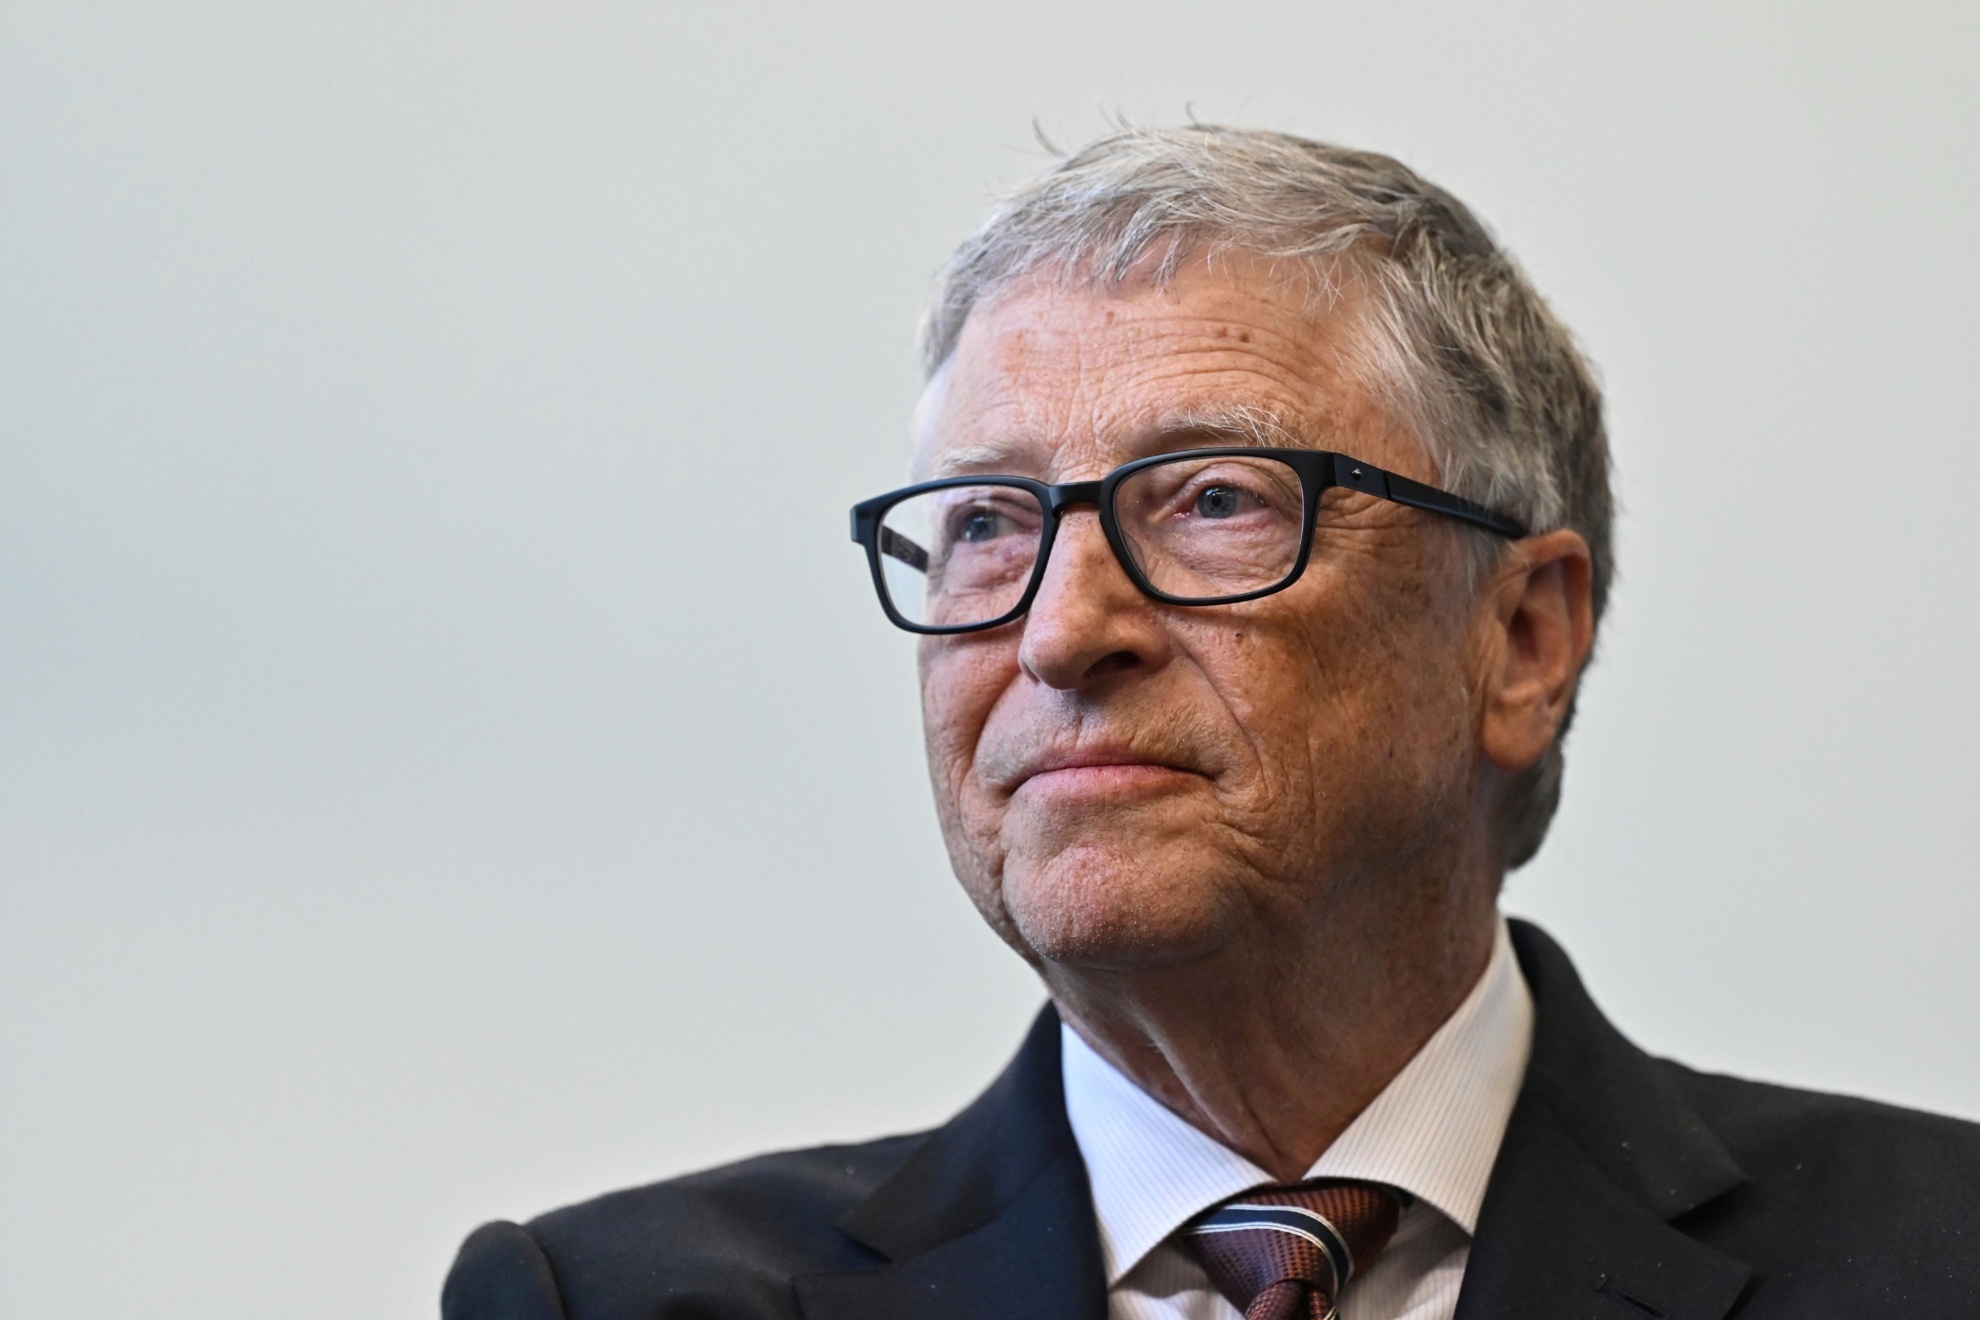 Bill Gates and his office are under serious scrutiny.